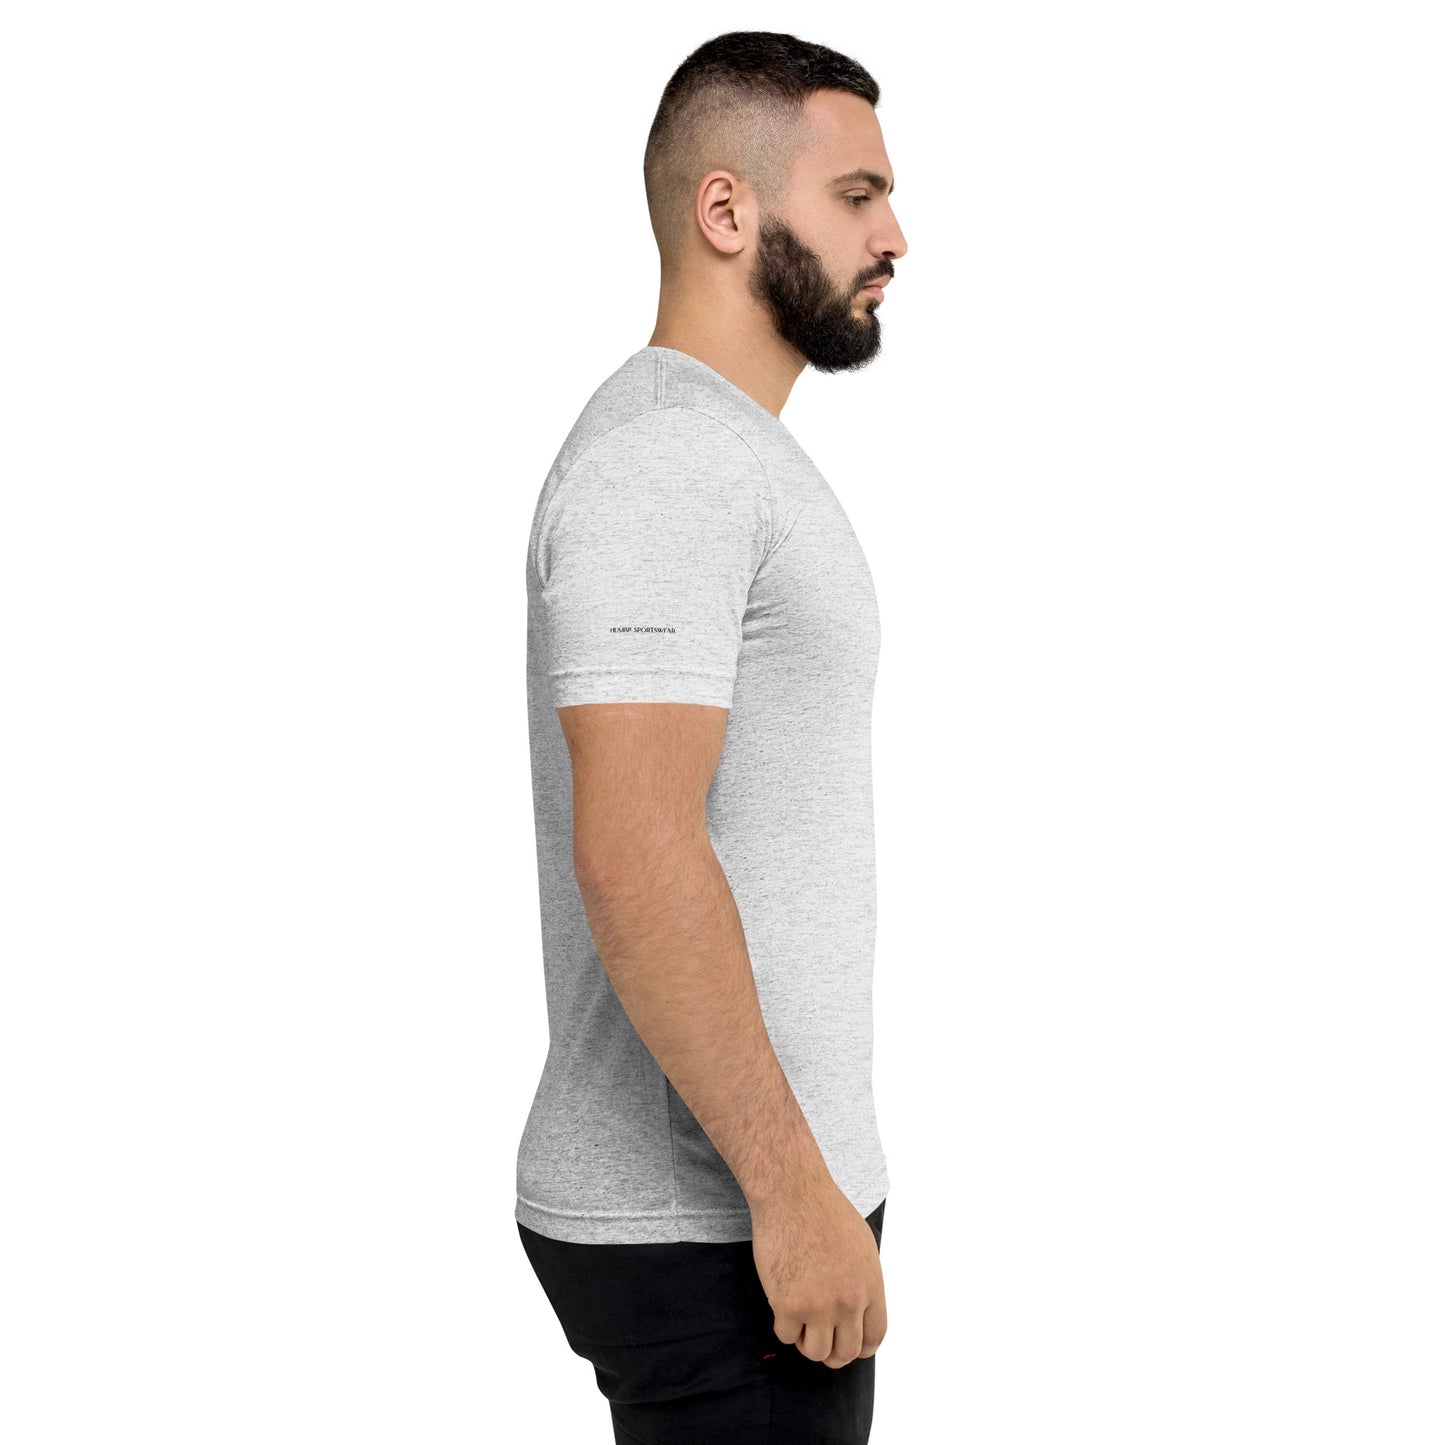 Humble Sportswear, men's tri-blend gray t-shirt for activewear 